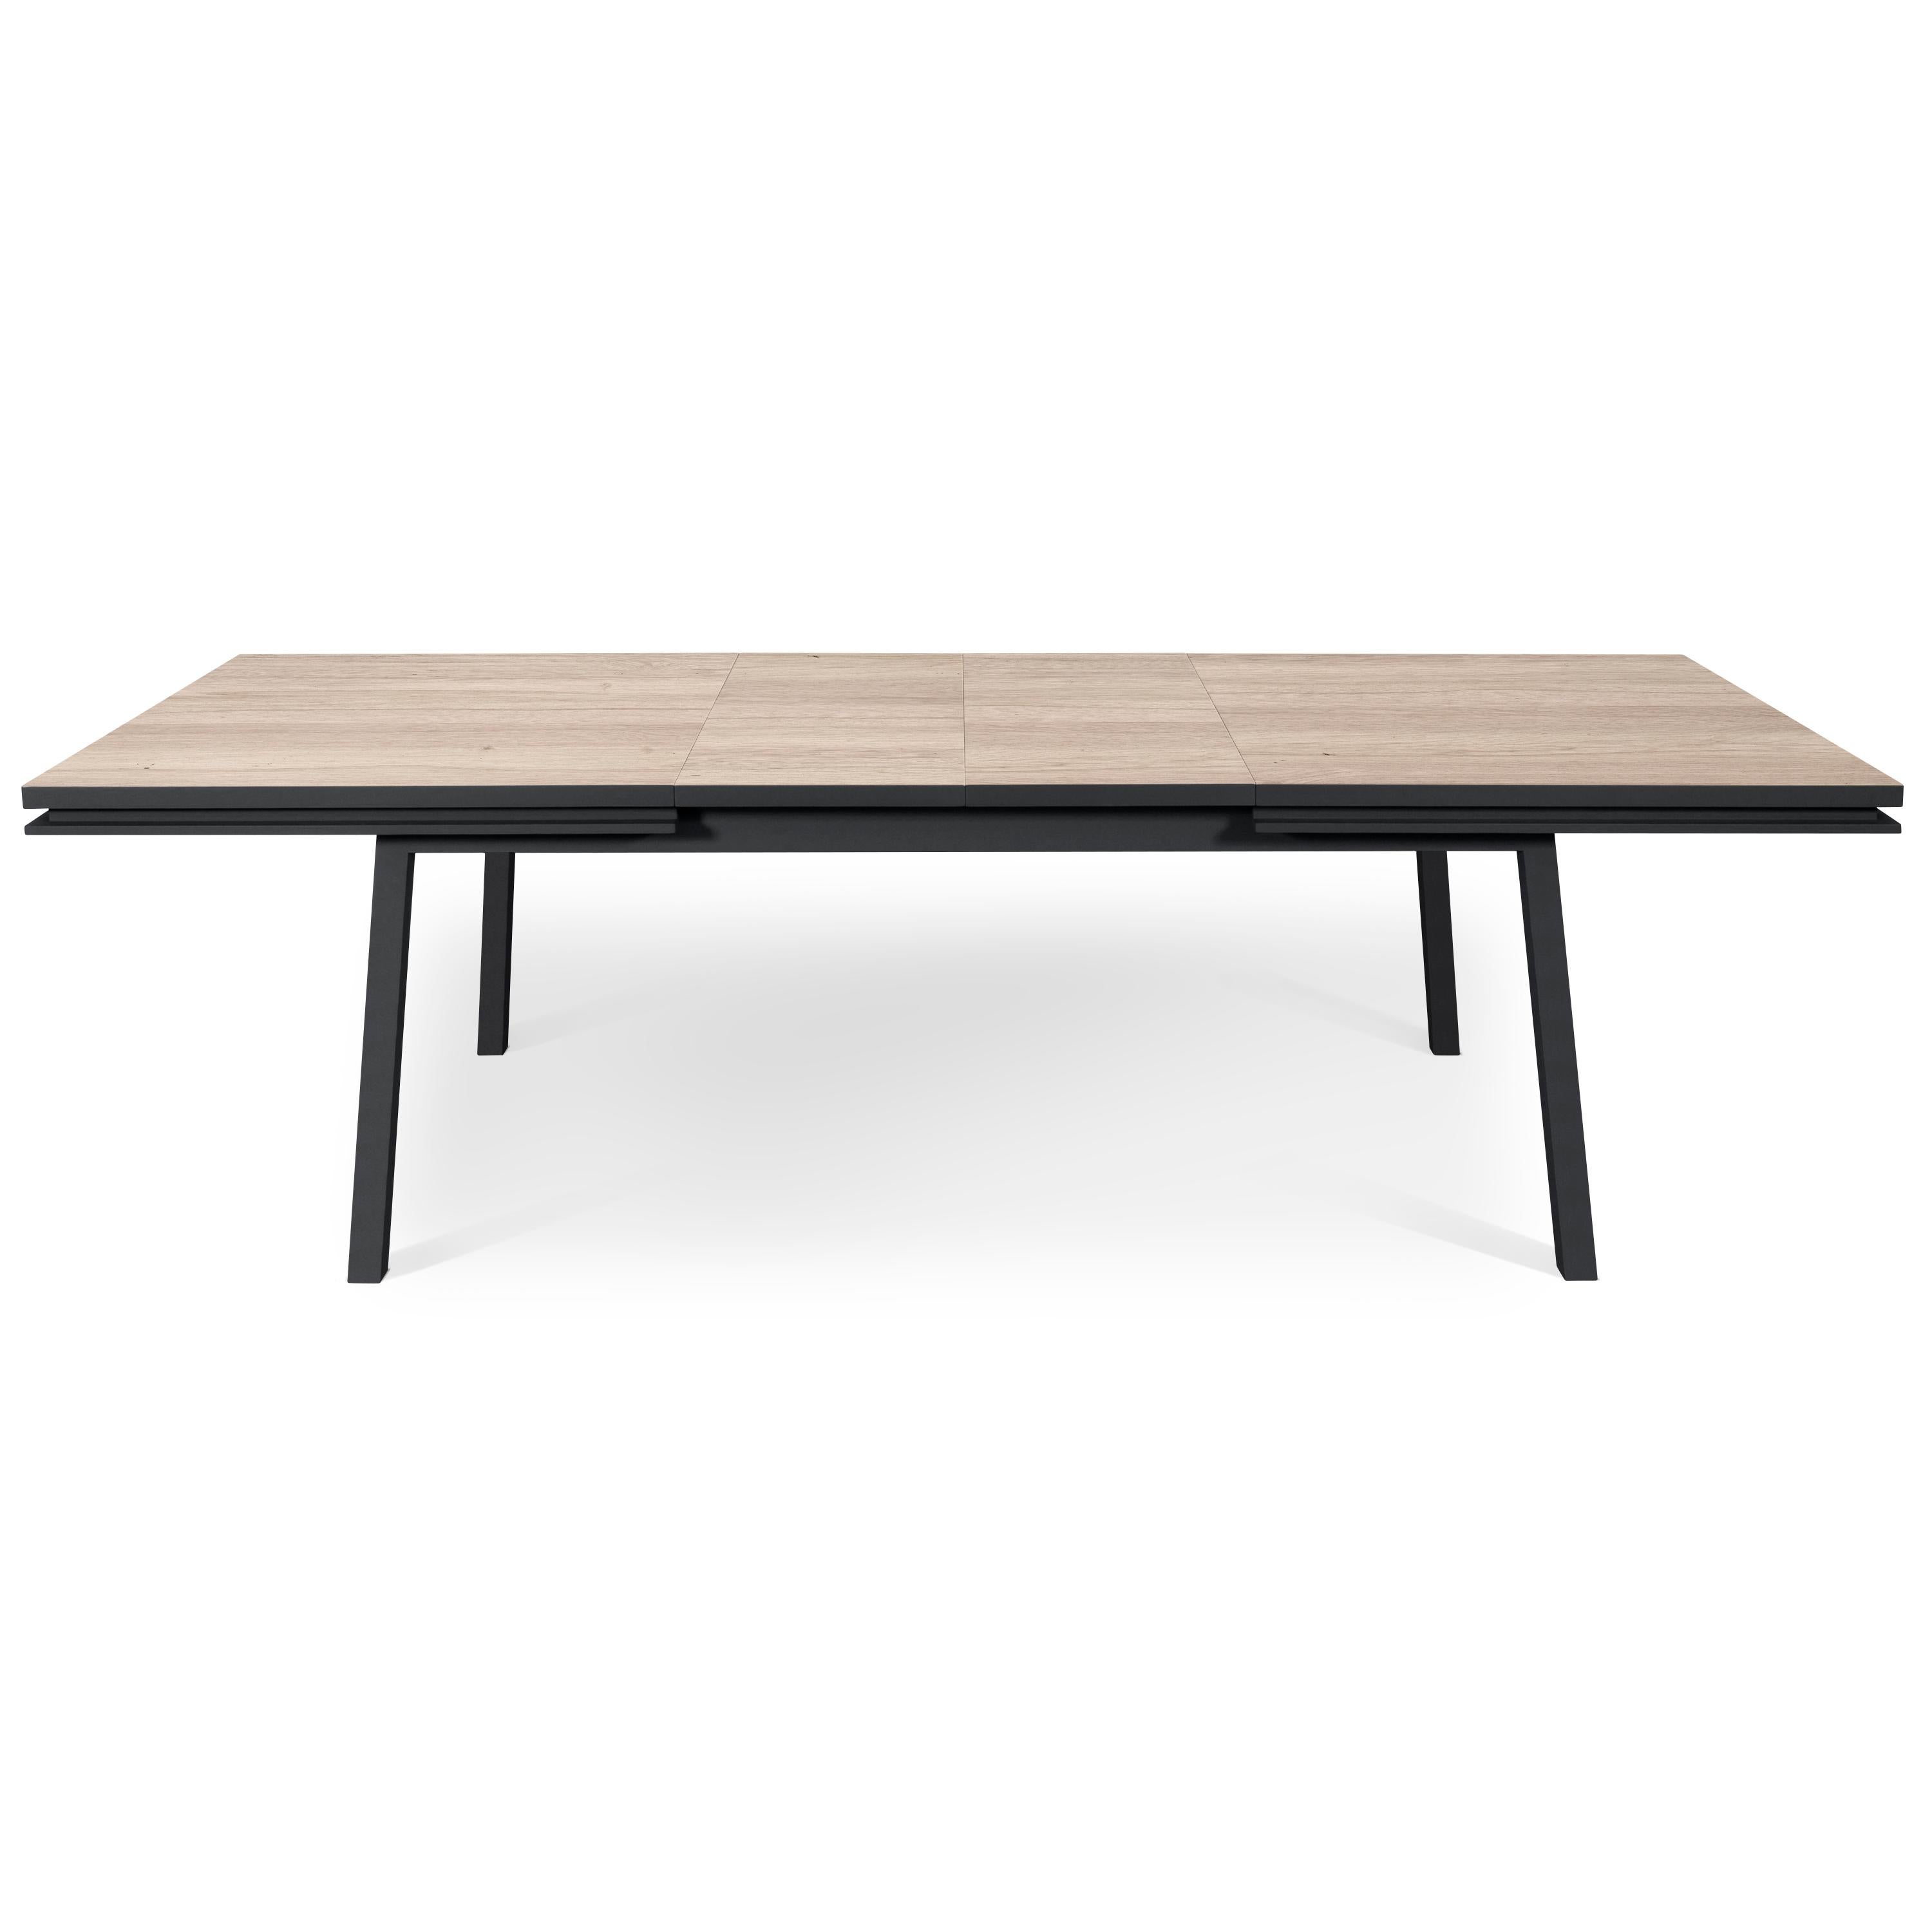 This rectangular extensible table in solid oak wood is designed by the famous parisian Designer Eric Gizard in a colored scandinavian sleek design. 

2 leafs or extensions of 40 cm / 15.7'' each folded under the tray

To open the tray and unfold